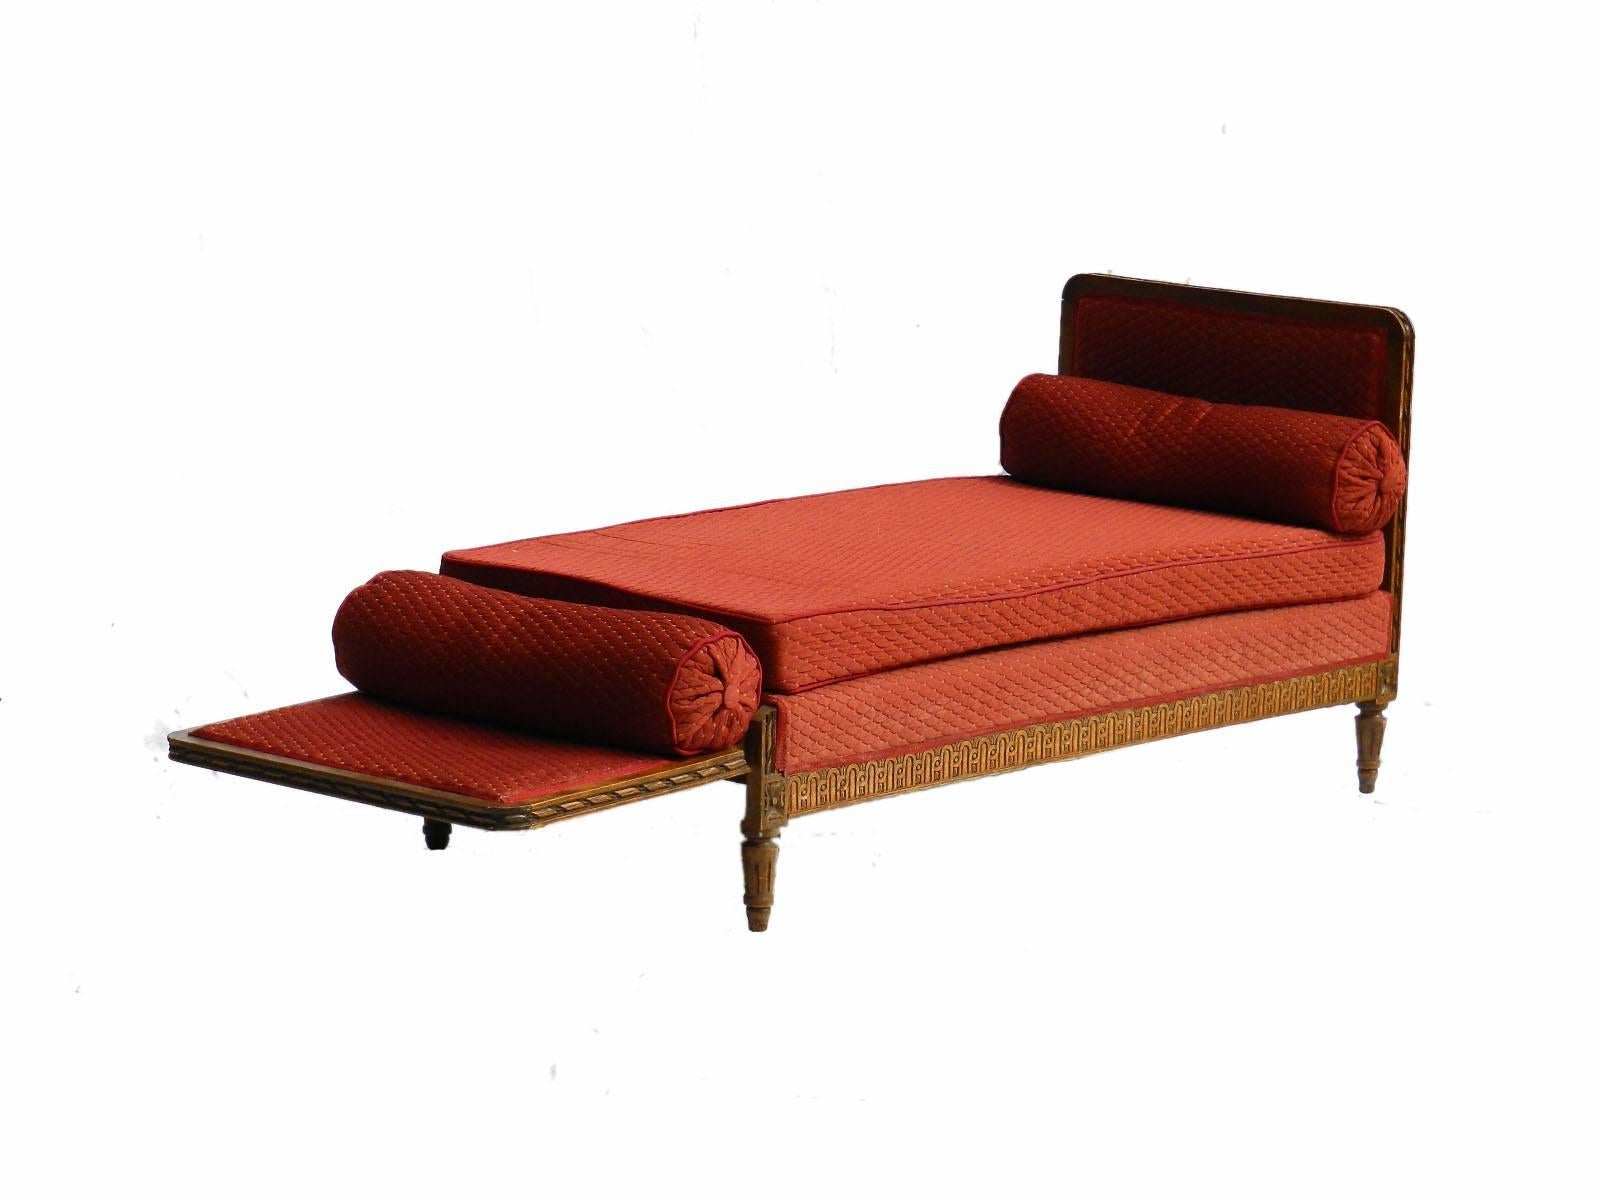 Unusual French drop end daybed sofa with cushions, circa 1920.
Upholstered daybed single chaise longue.
Carved oak.
Upholstery good with original sprung base.
We suggest recovering to suit your interior if you would like a quote for this to be